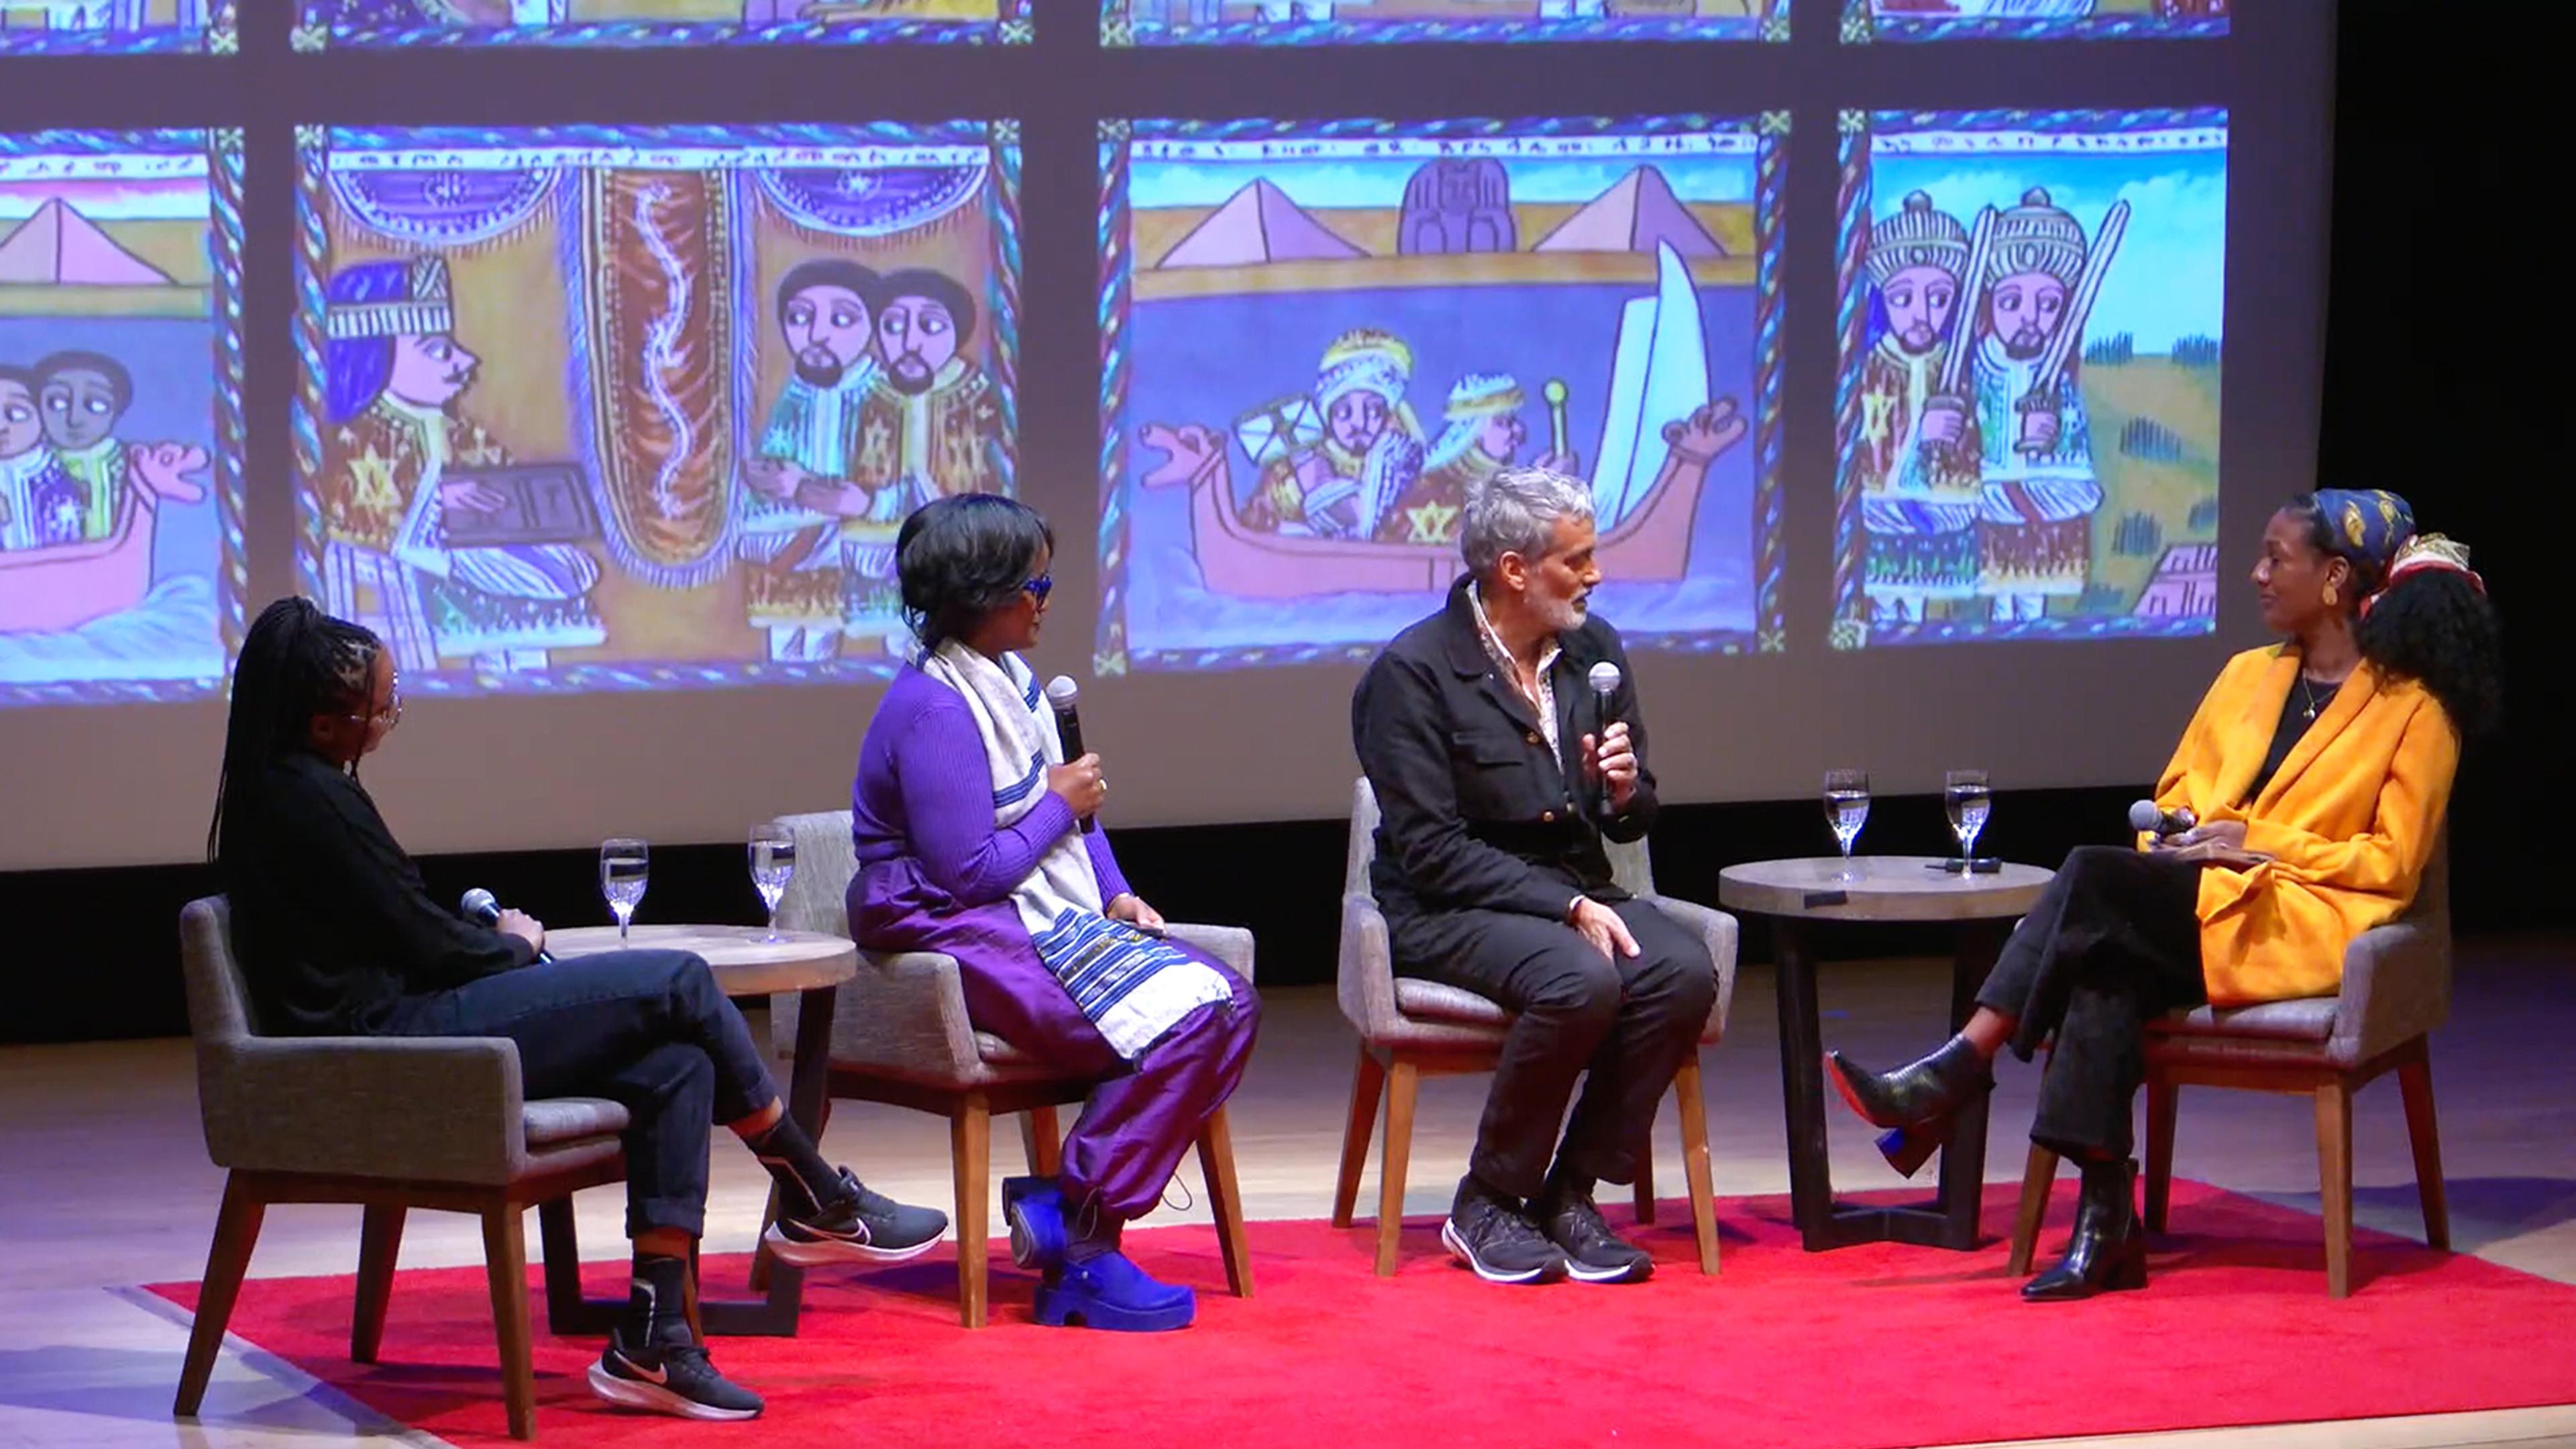 Three artists and one moderator sitting in modern grey chairs on a stage each holdings microphones with a red carpet underneath them. There is a projection screen behind them.